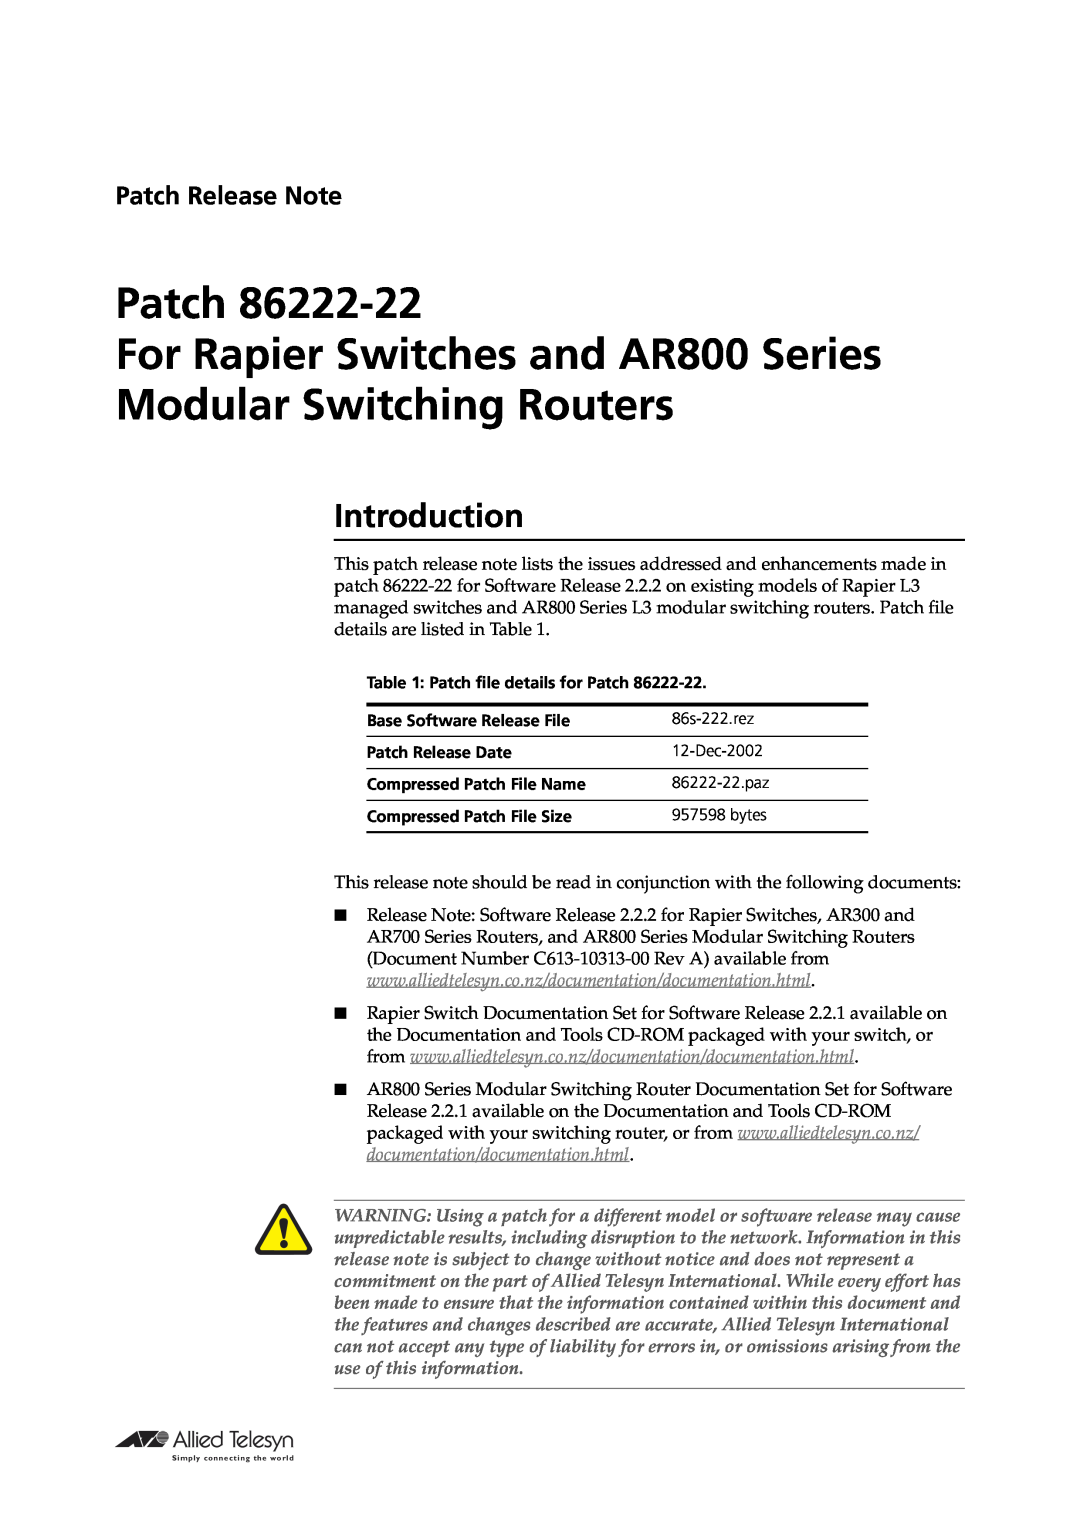 Allied Telesis manual Introduction, Patch For Rapier Switches and AR800 Series Modular Switching Routers 